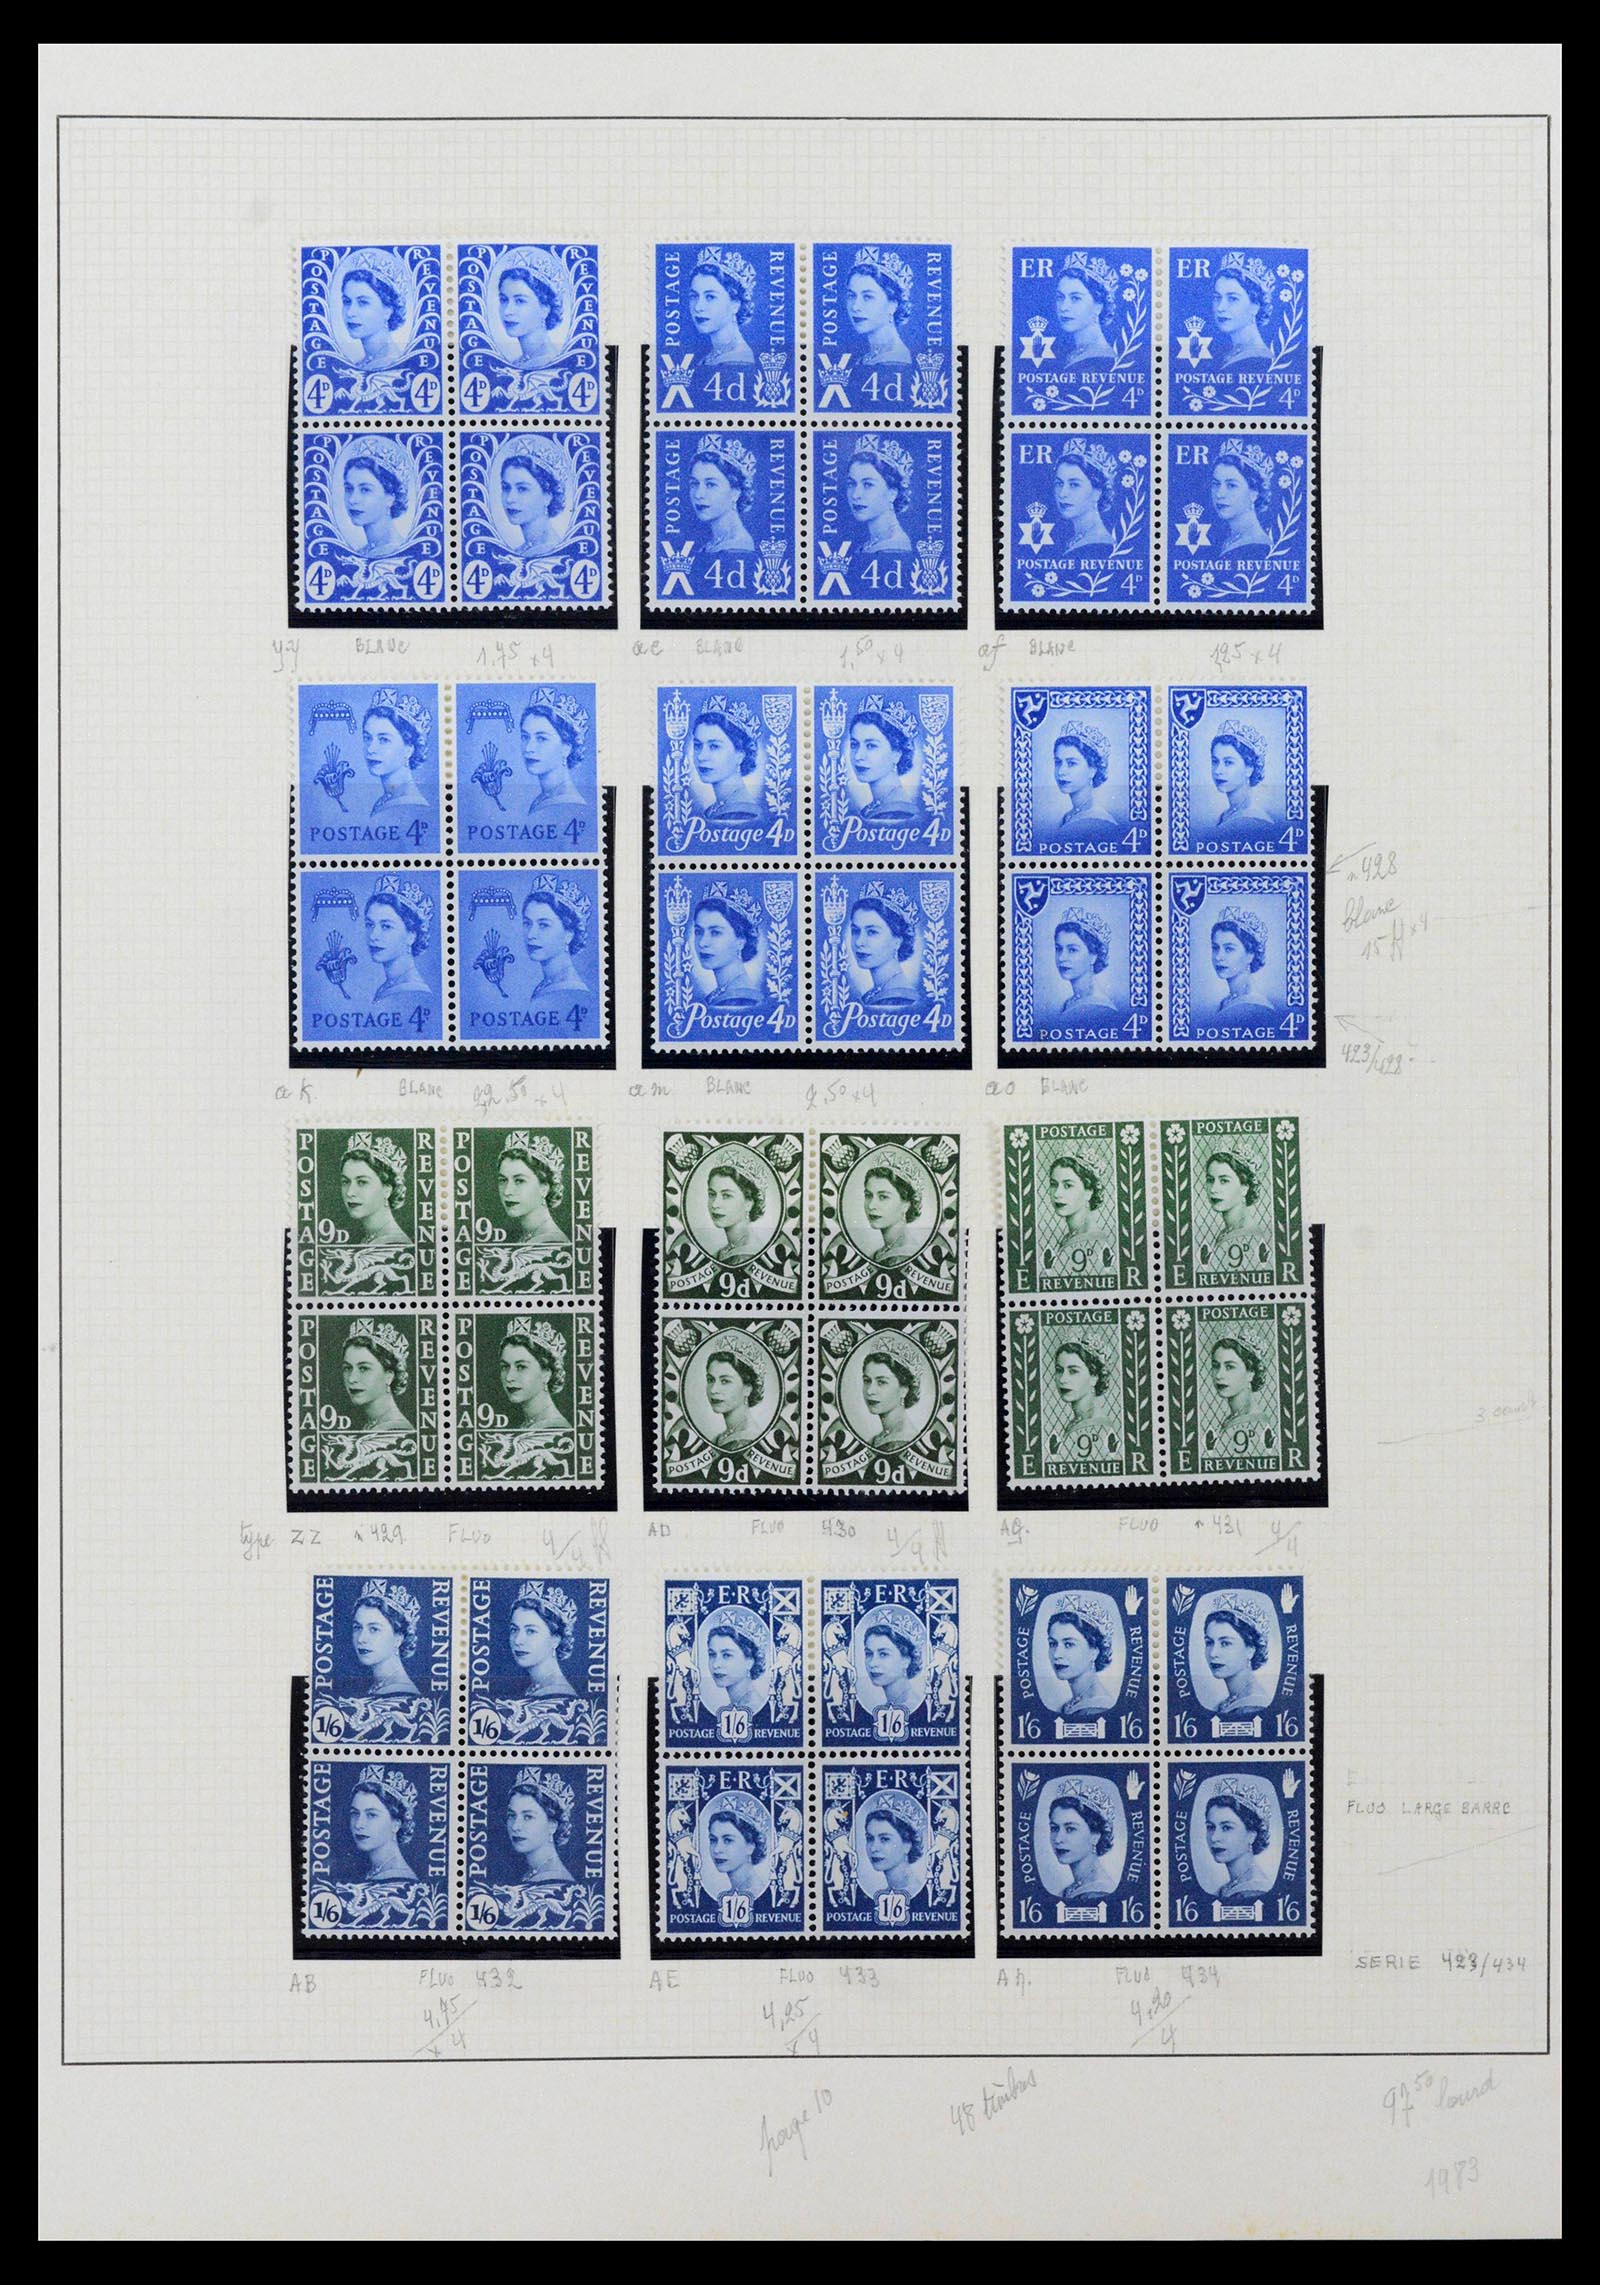 39033 0070 - Stamp collection 39033 Great Britain 1912-1981.